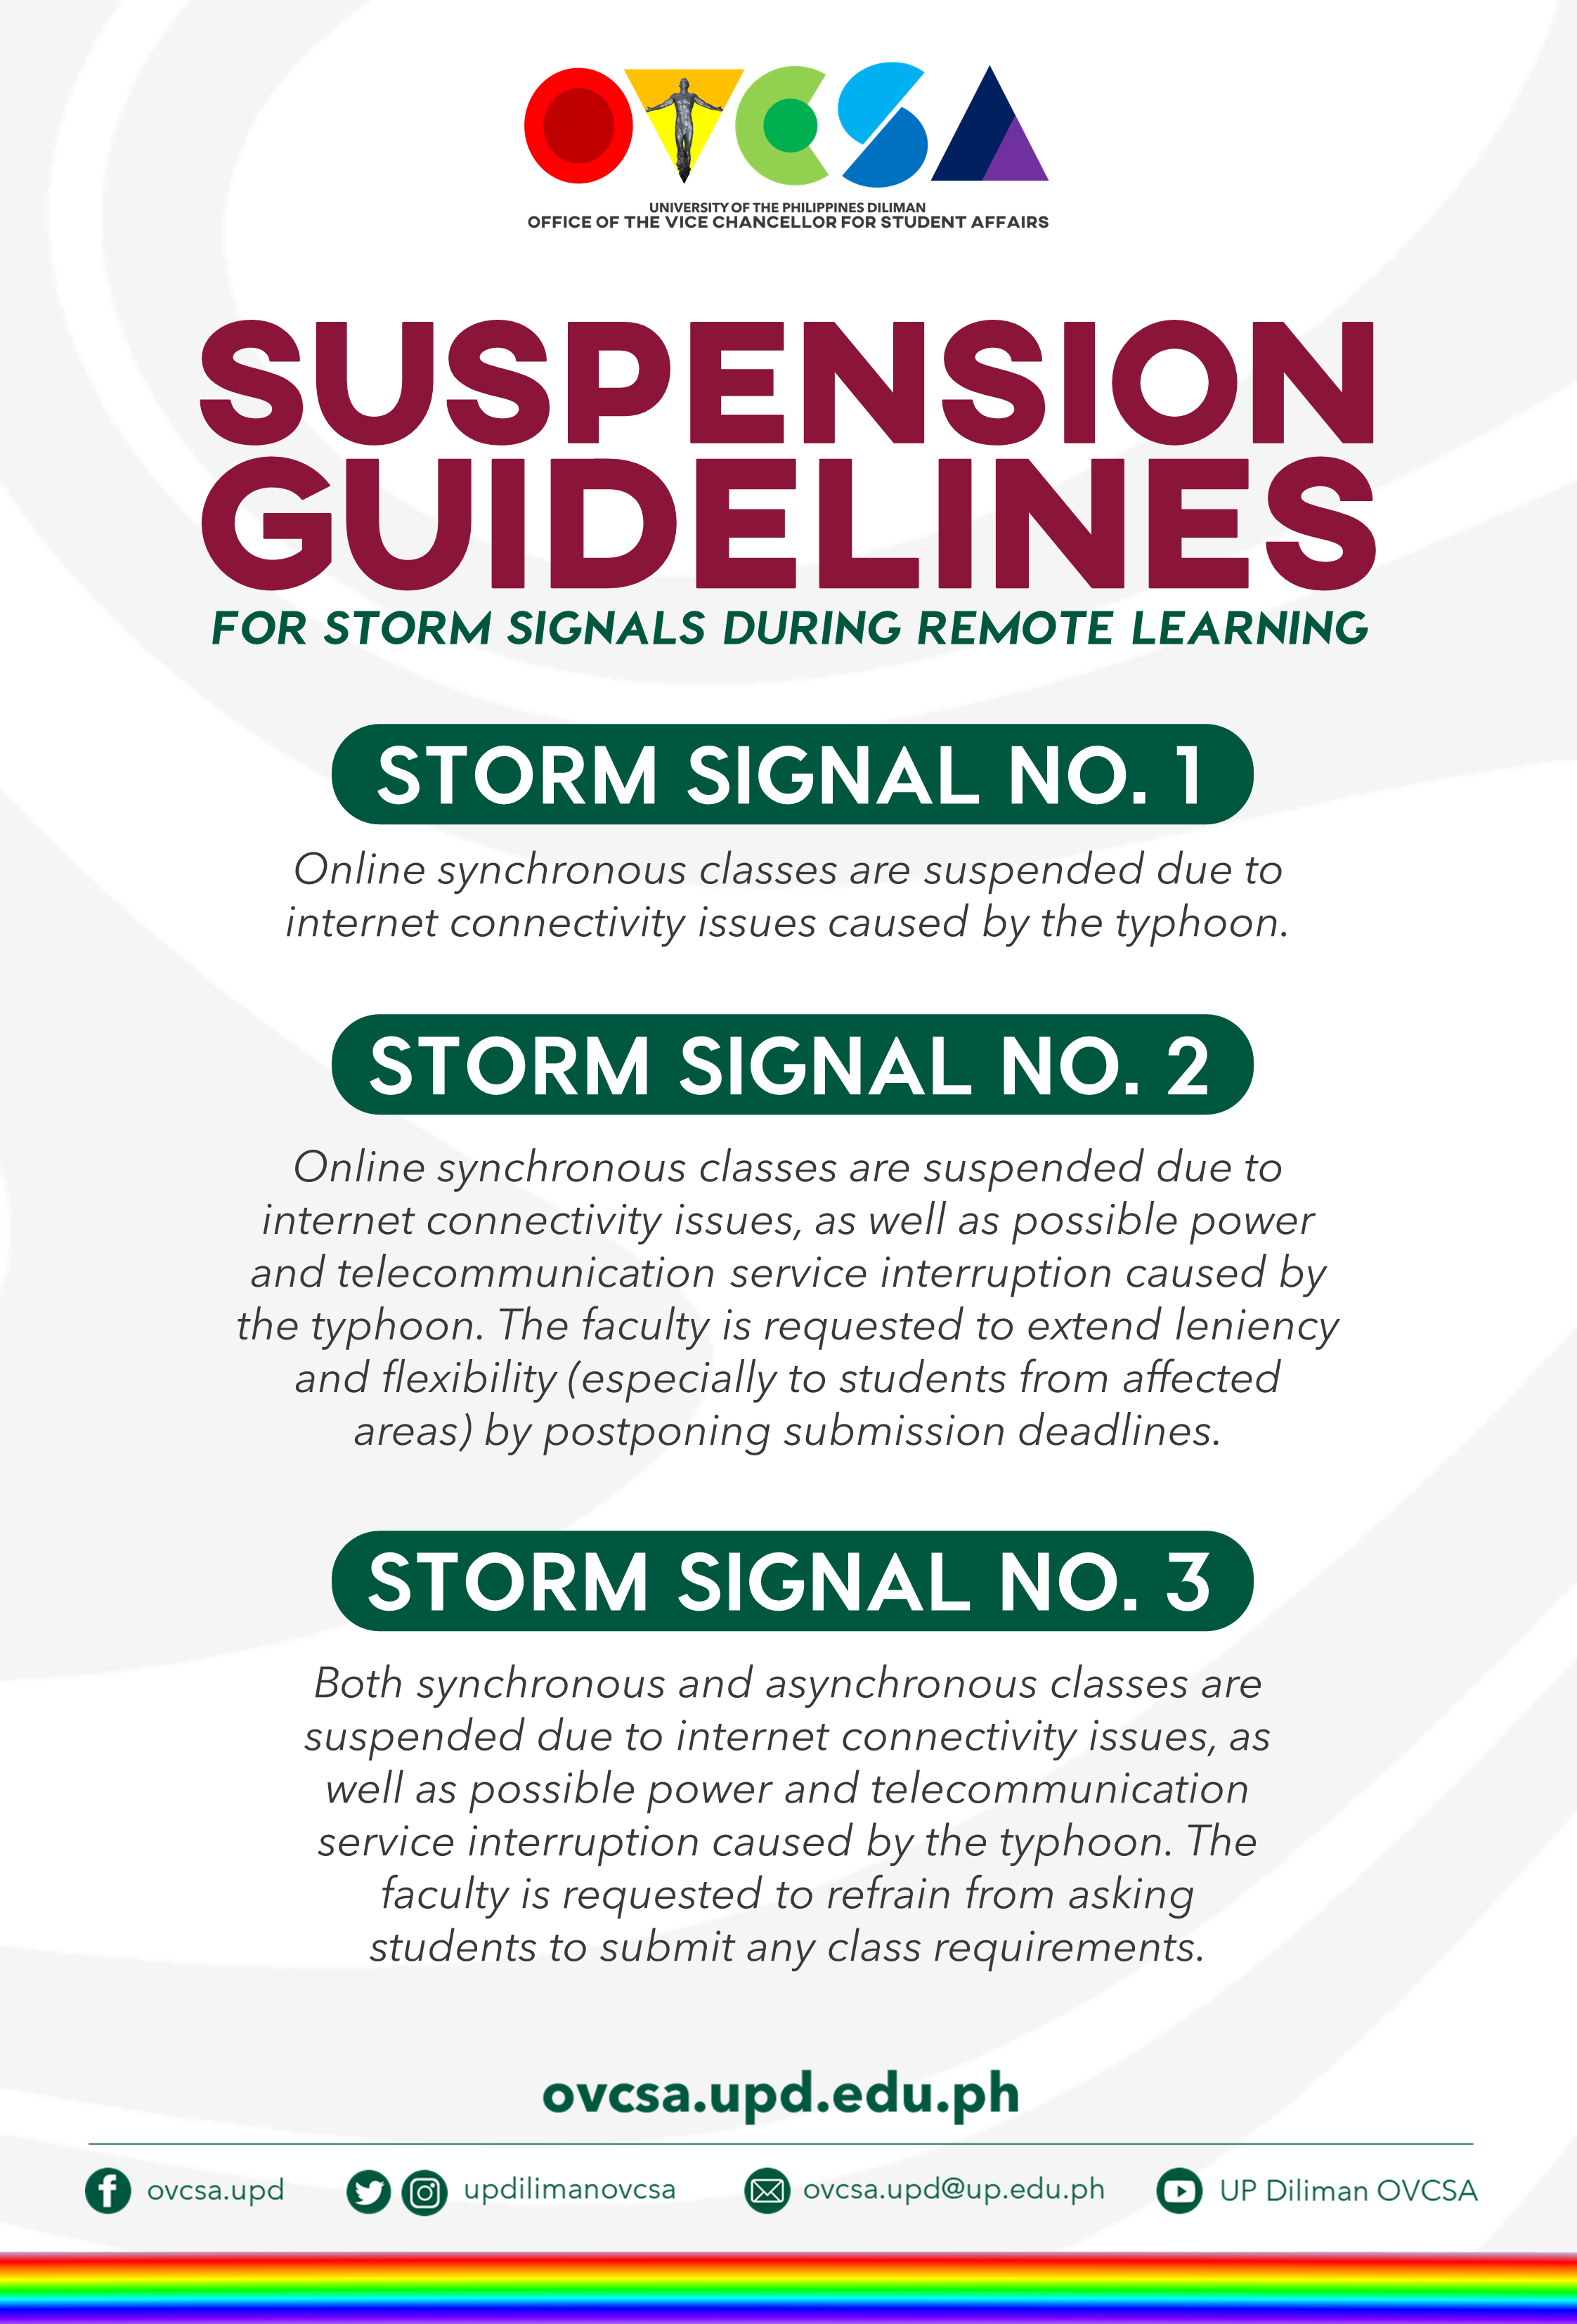 UPDATED] UP Diliman releases Guidelines for Suspension of Classes